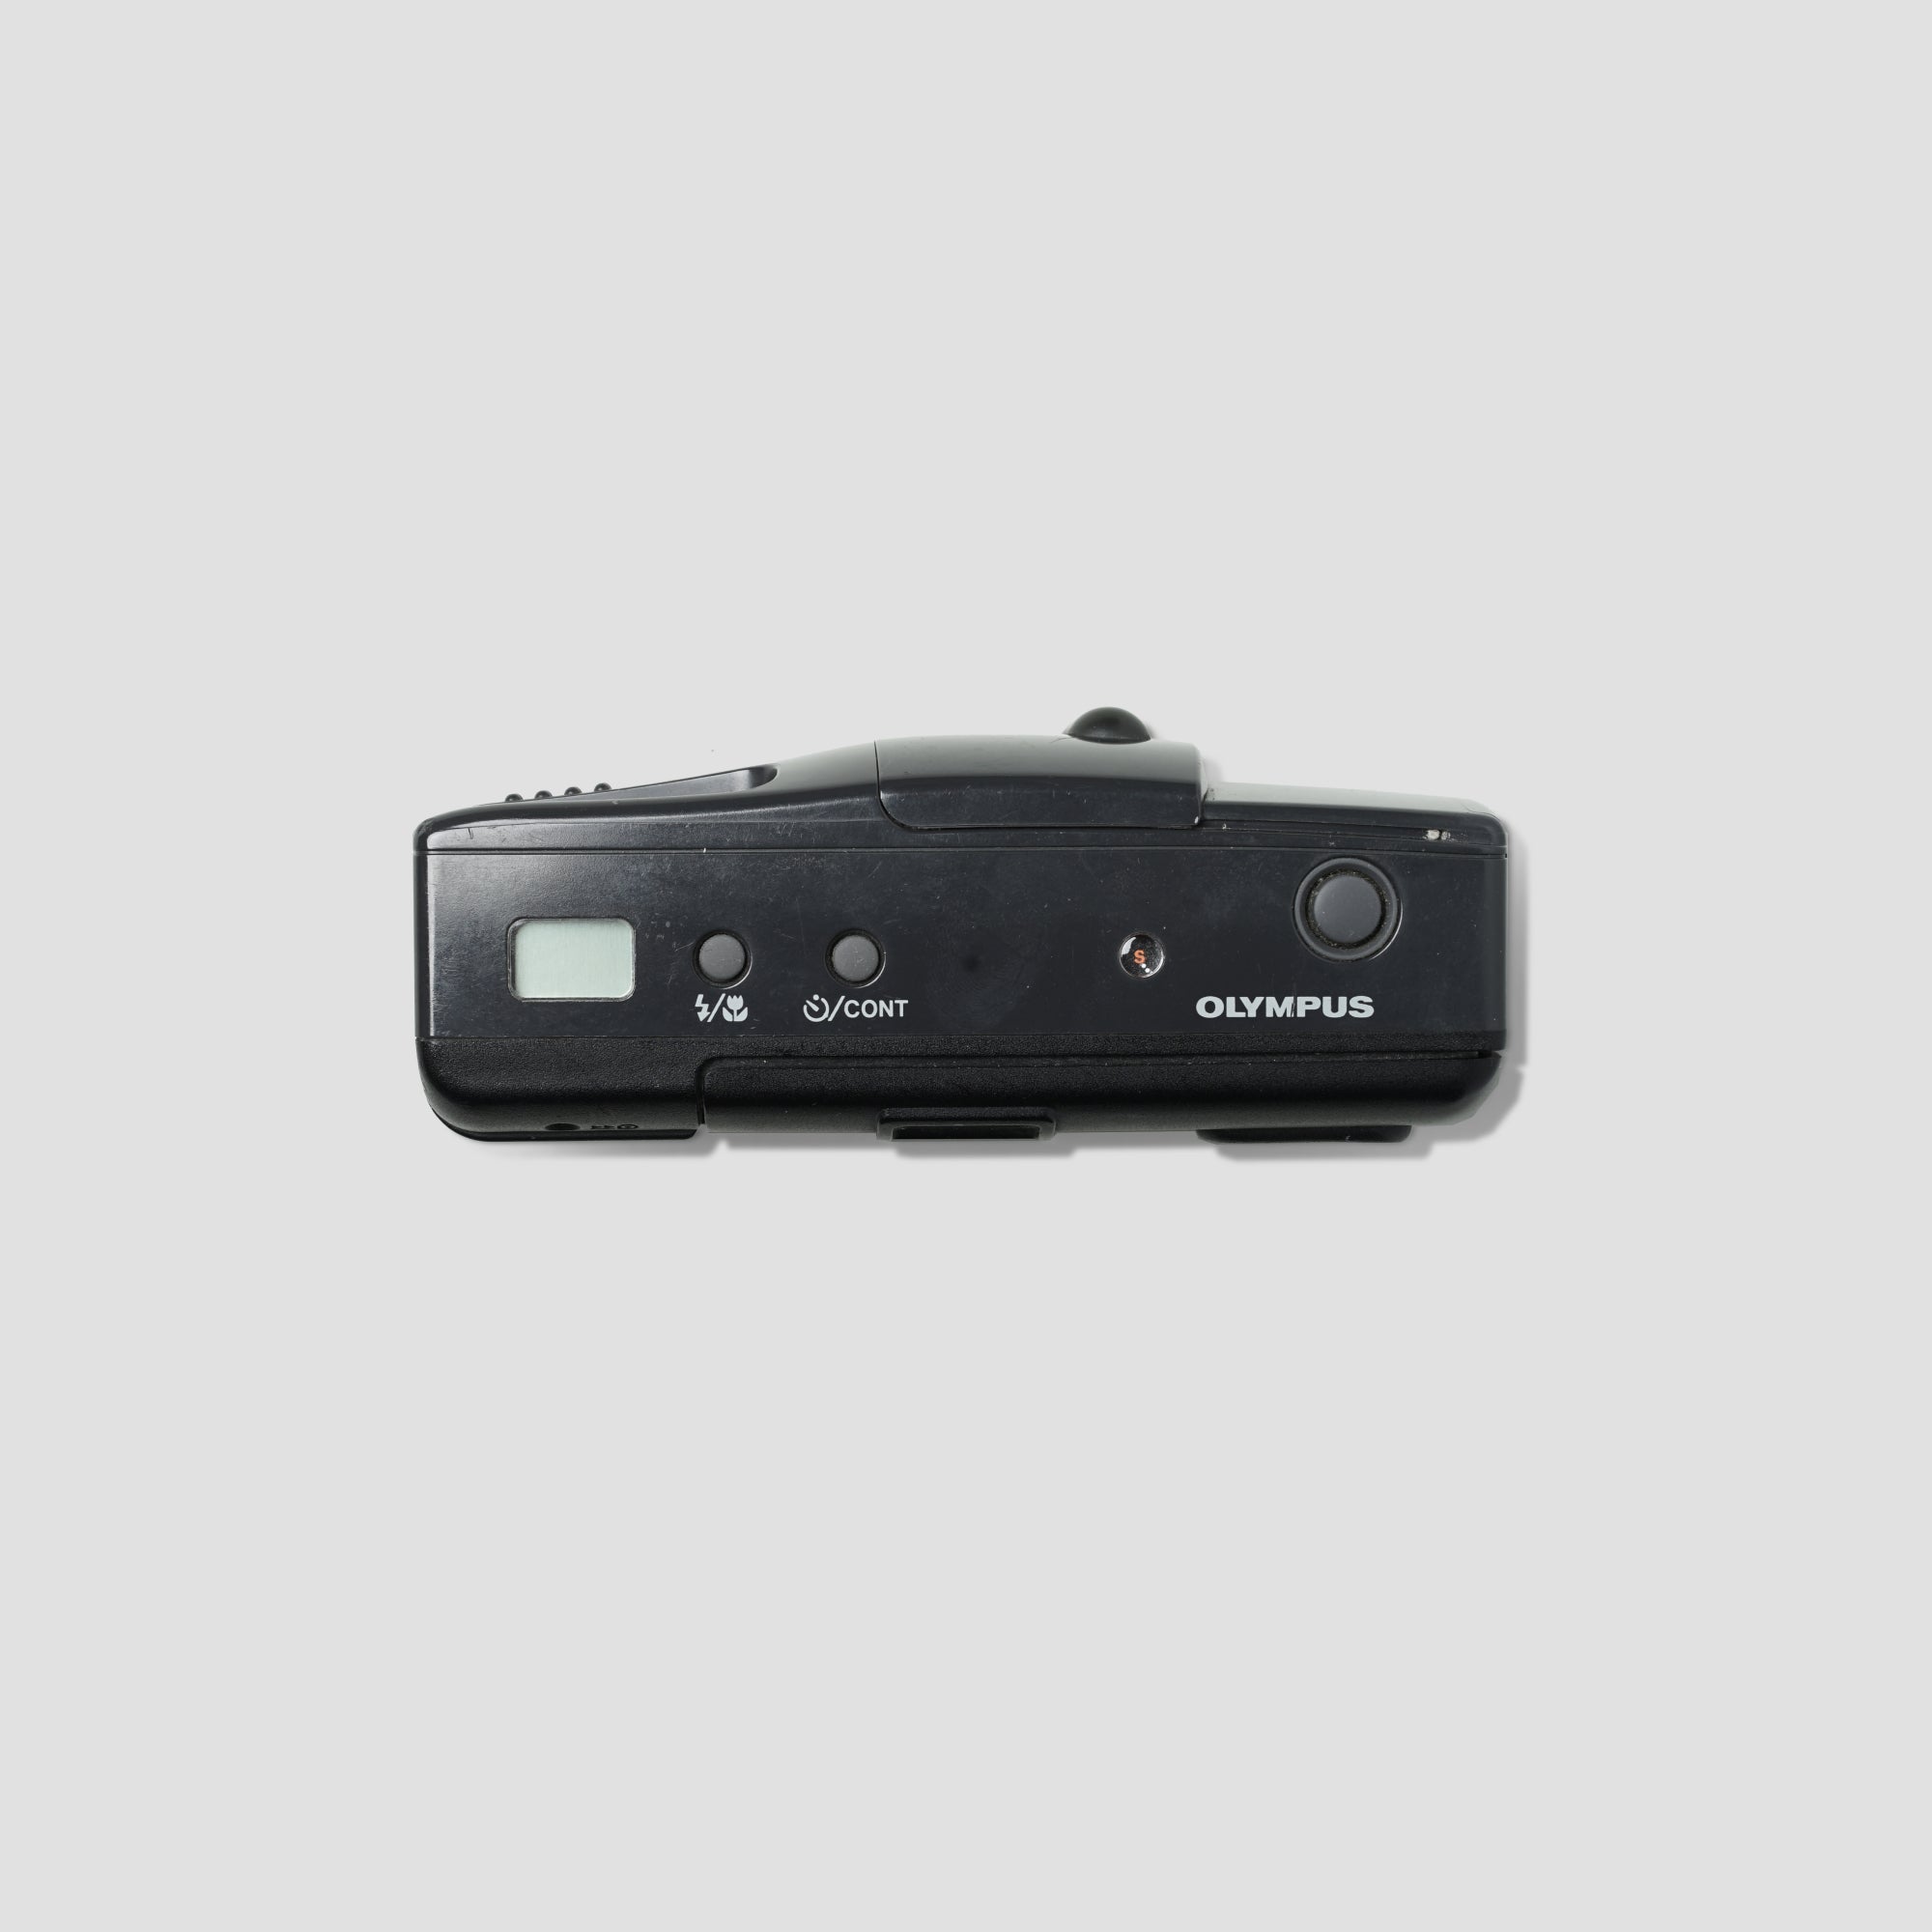 Buy Olympus AF-1 Super now at Analogue Amsterdam